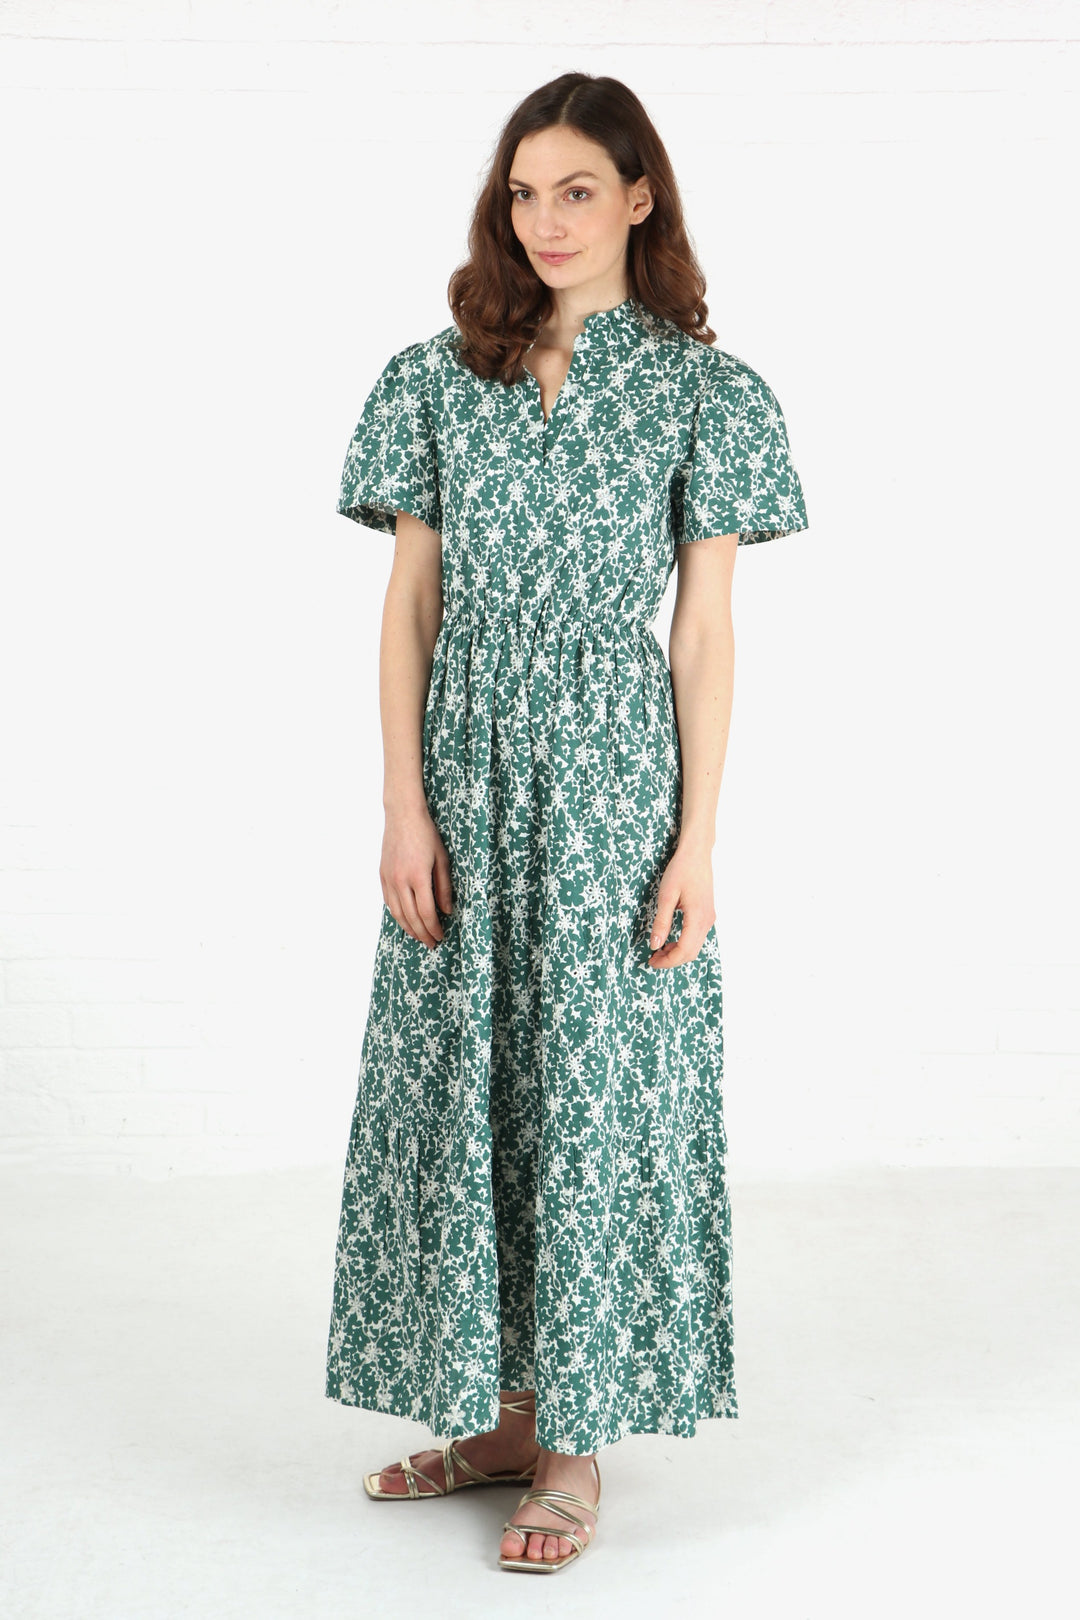 model wearing a short sleeve tiered maxi dress in green and white with an all over floral broderie anglaise detail